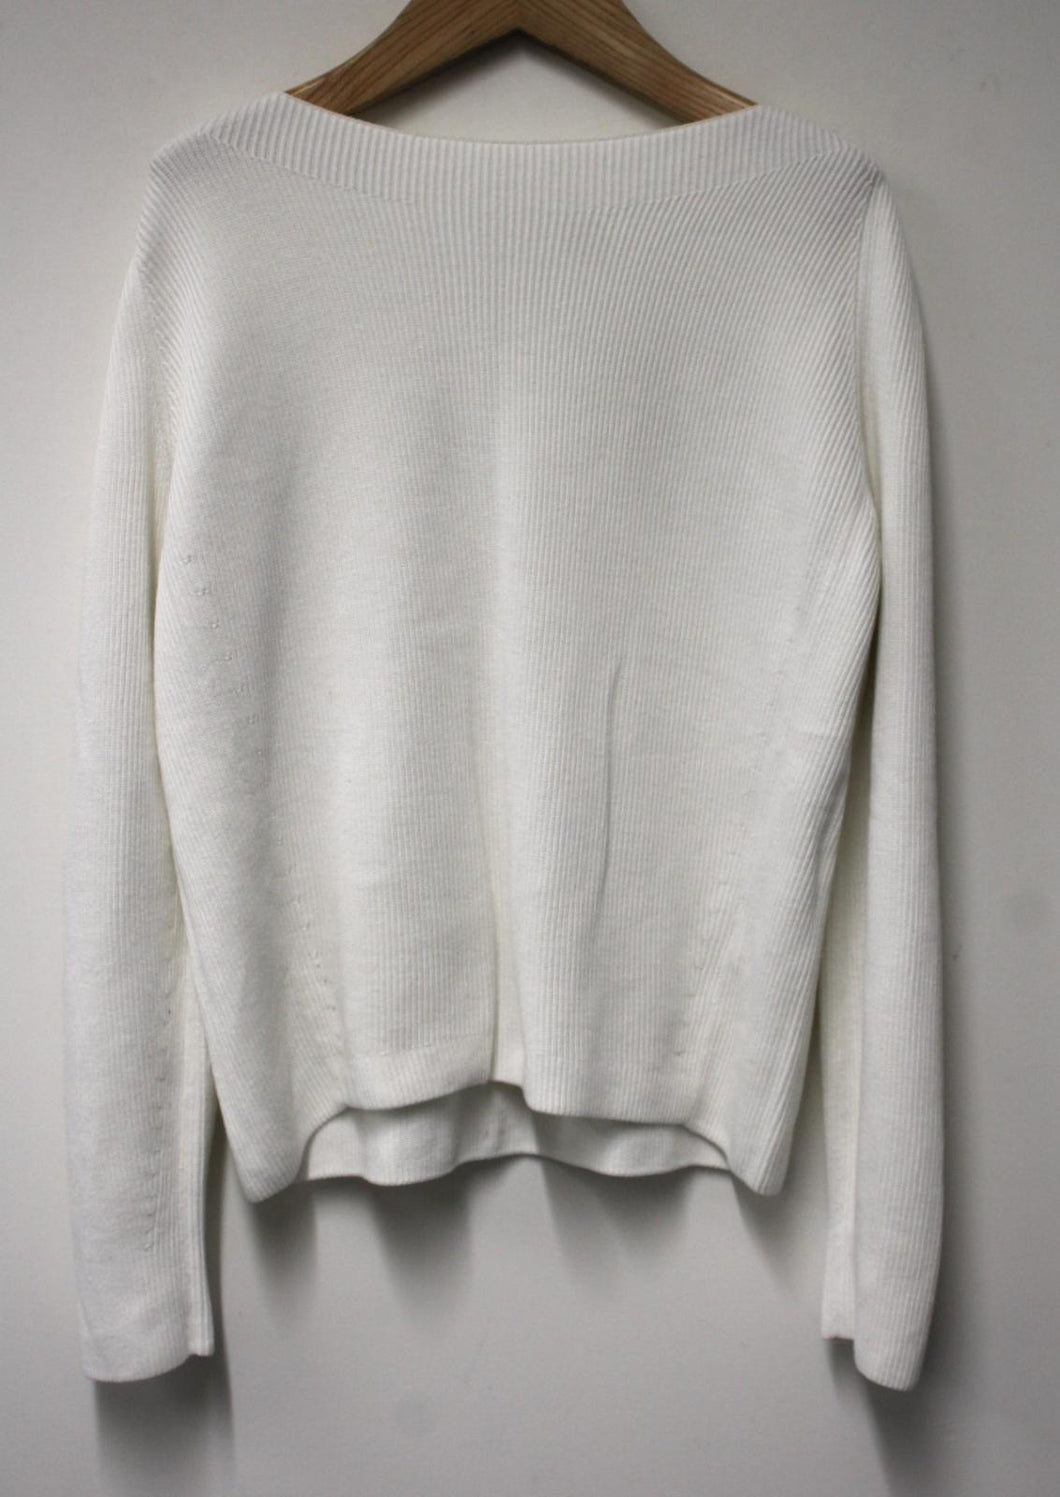 VINCE Ladies Cream White Cotton Ribbed Knit Long Sleeve Sweater Jumper Size M